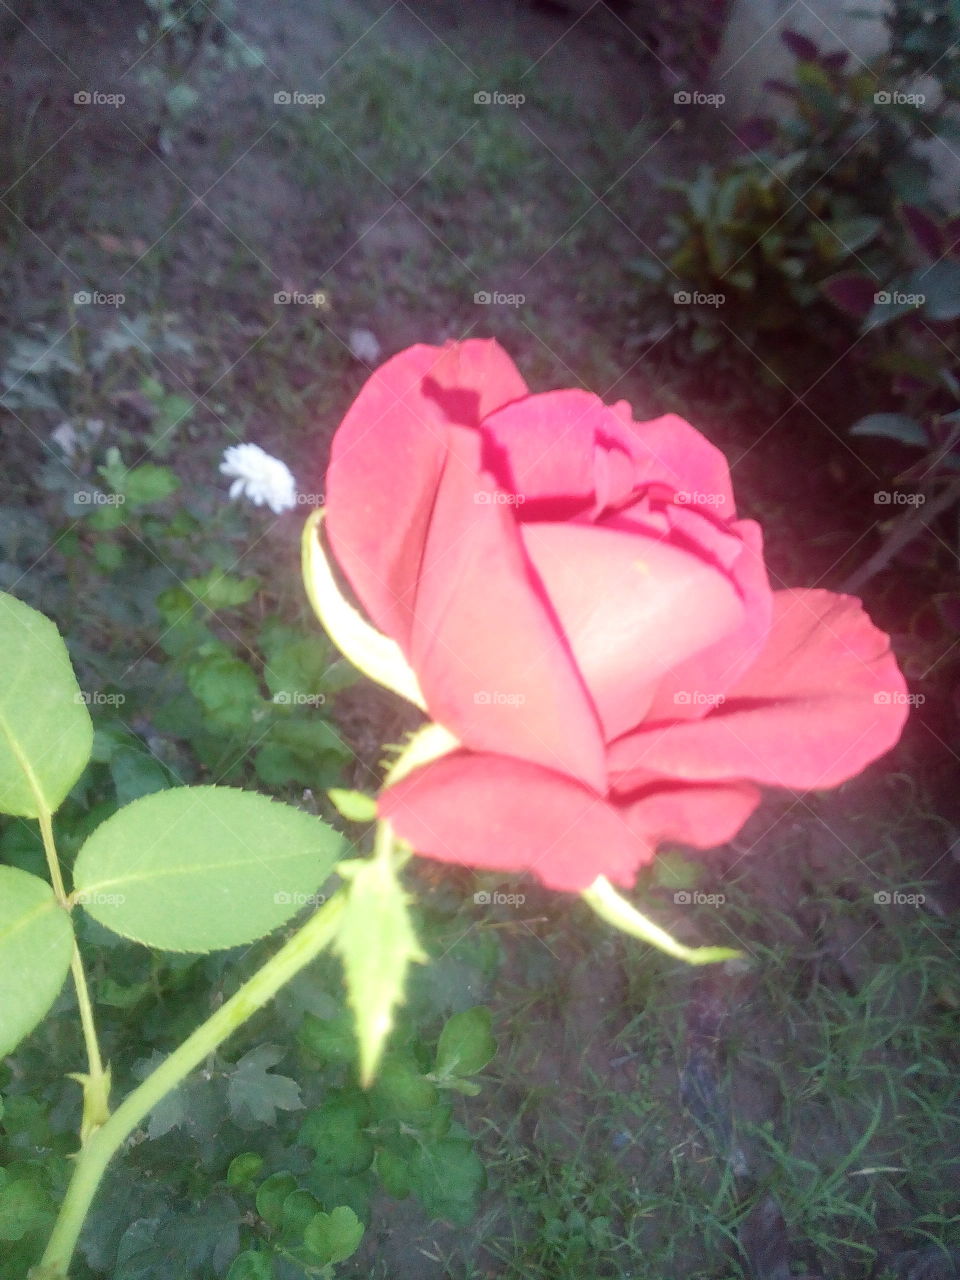 rose. a single flower in a single plant